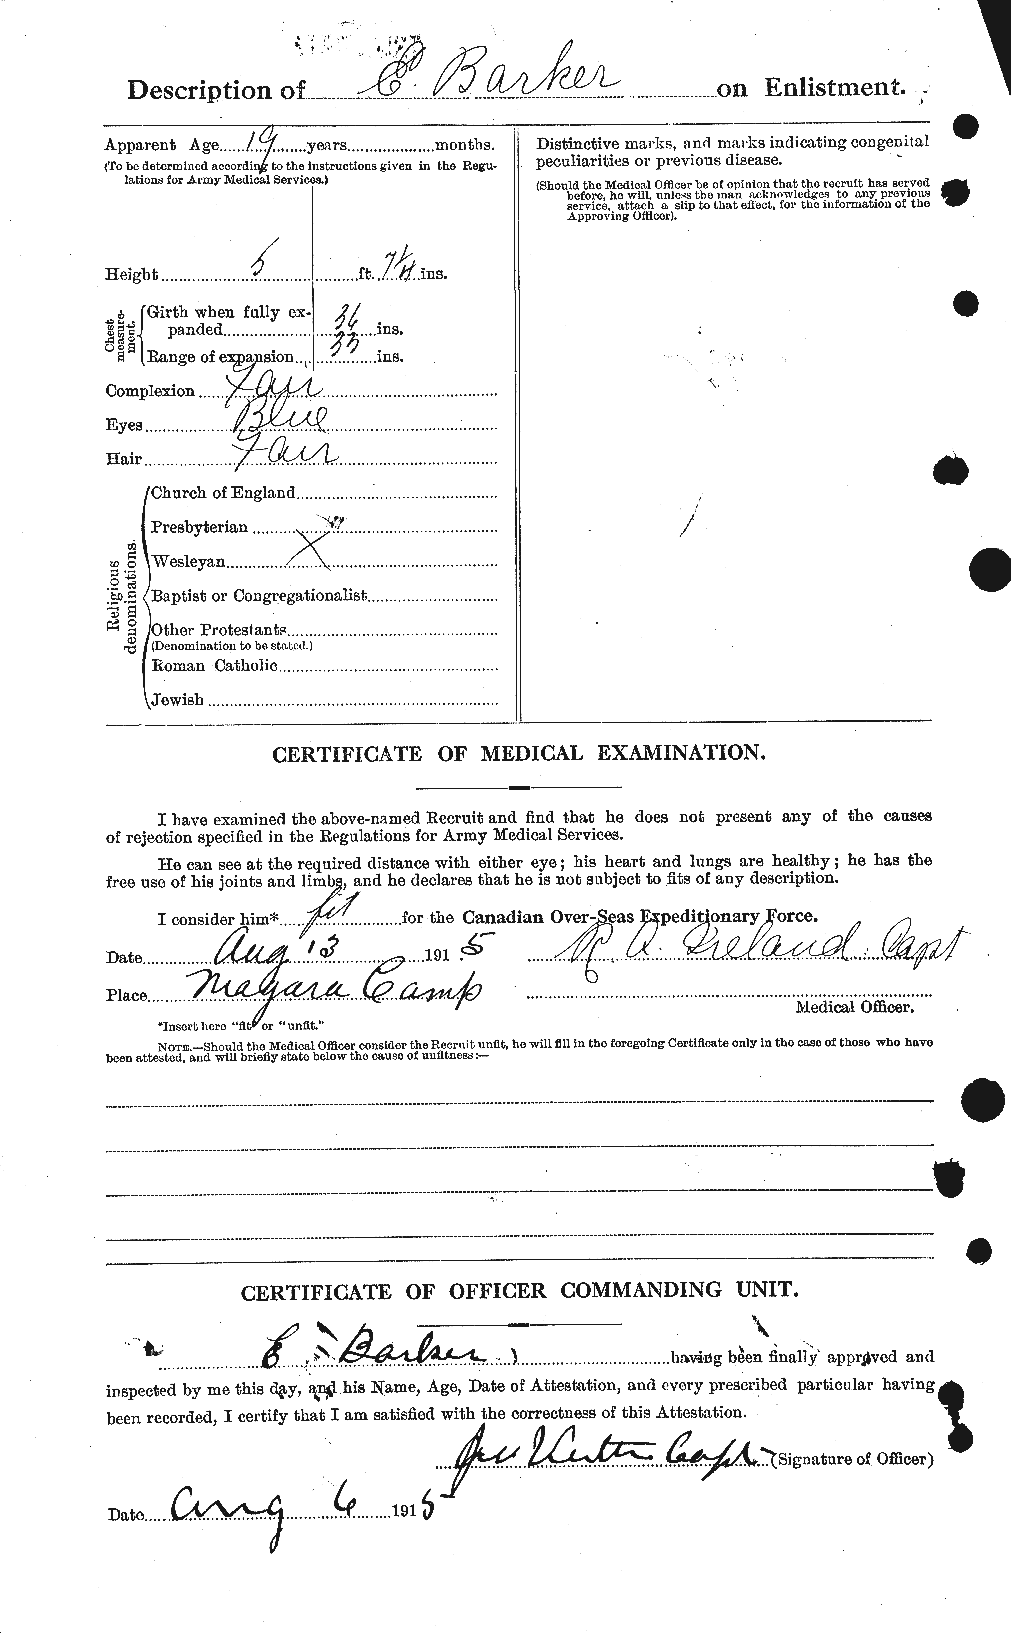 Personnel Records of the First World War - CEF 227598b